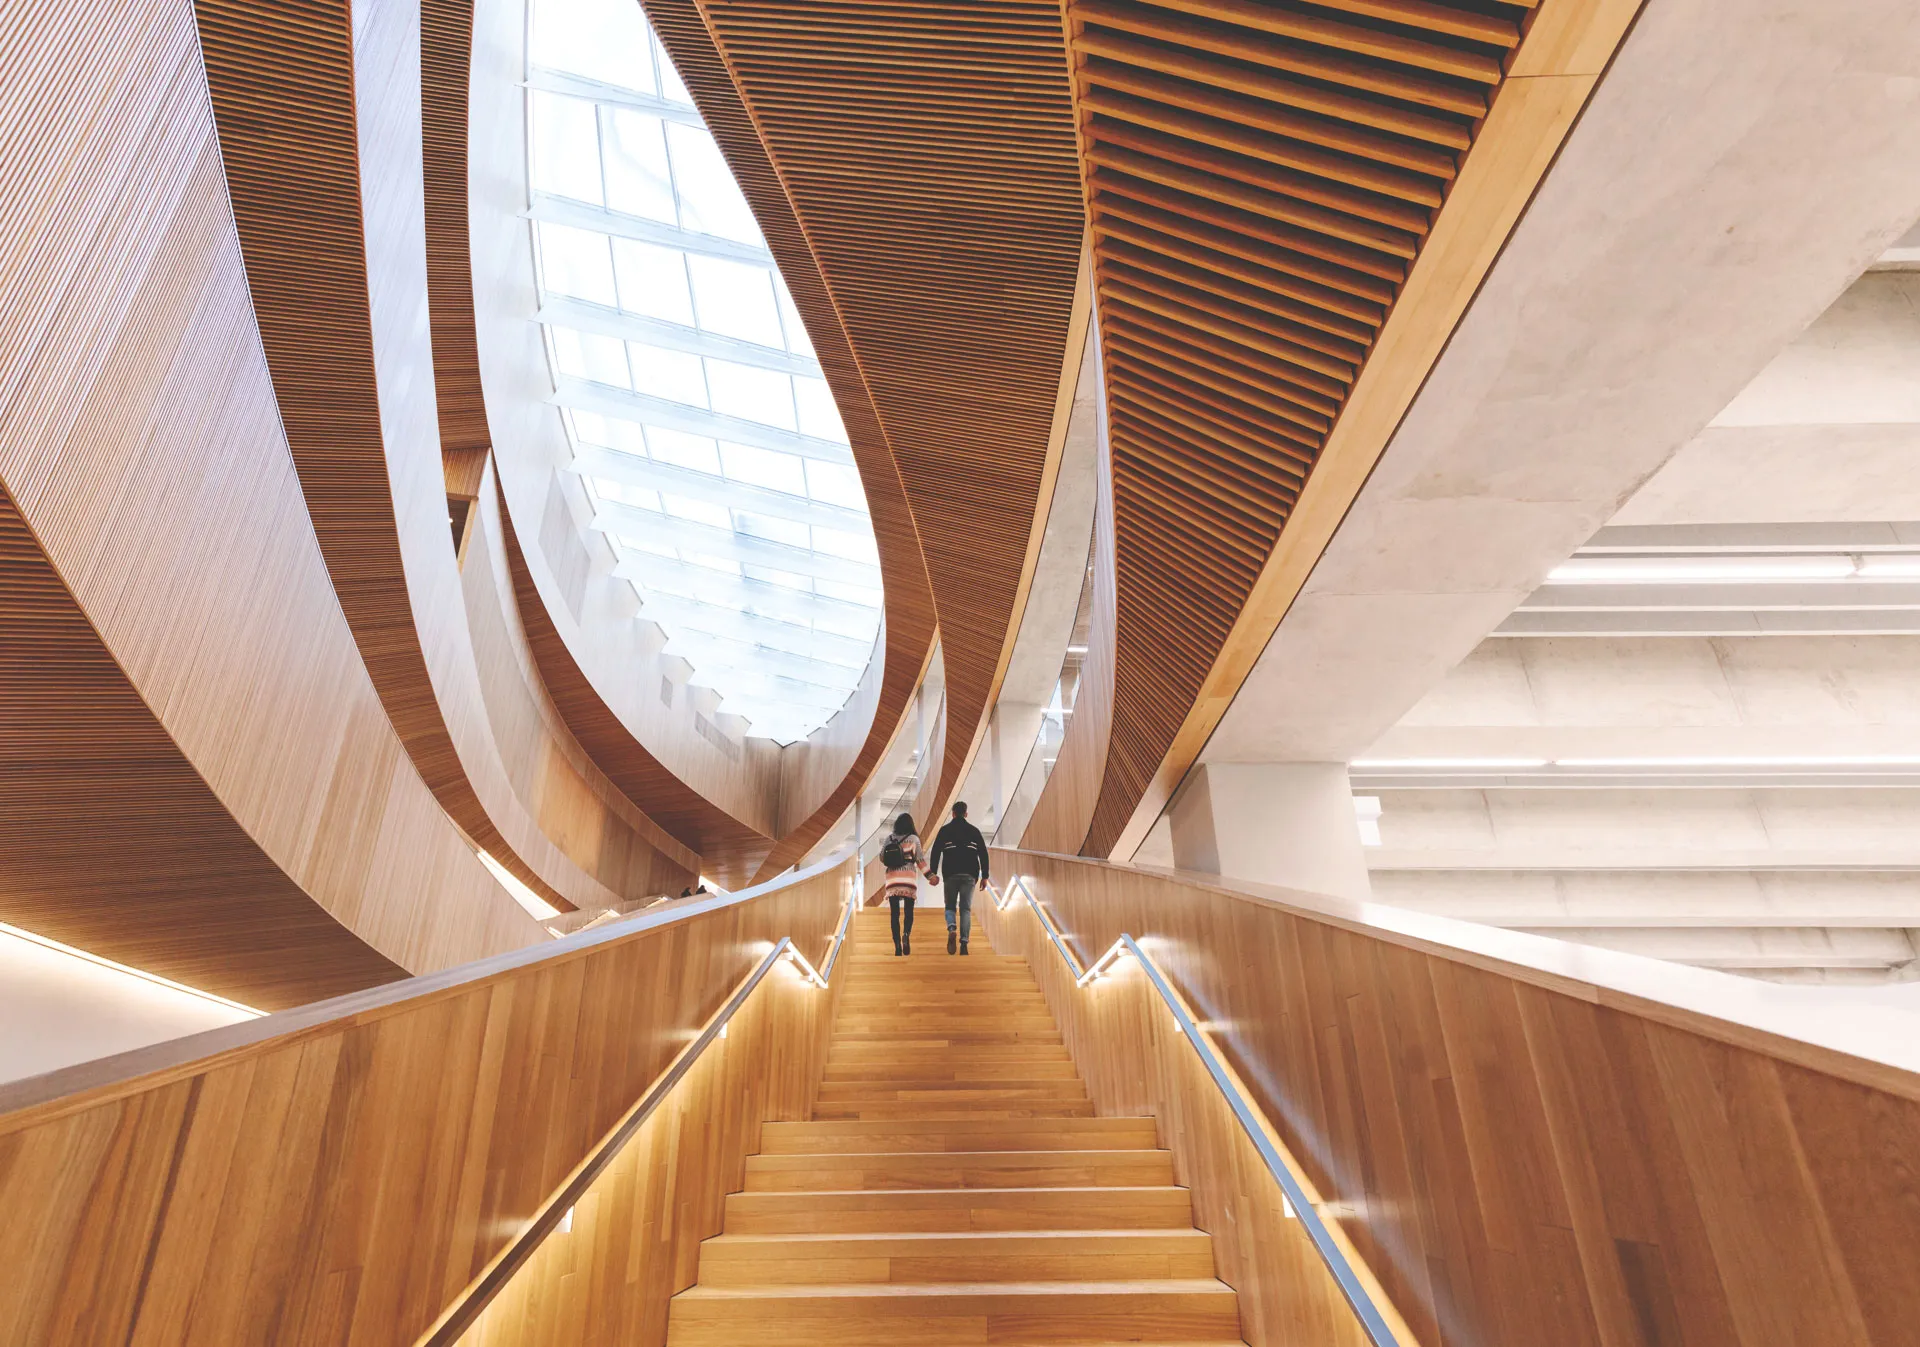 Make the New Central Library part of your weekend getaway.